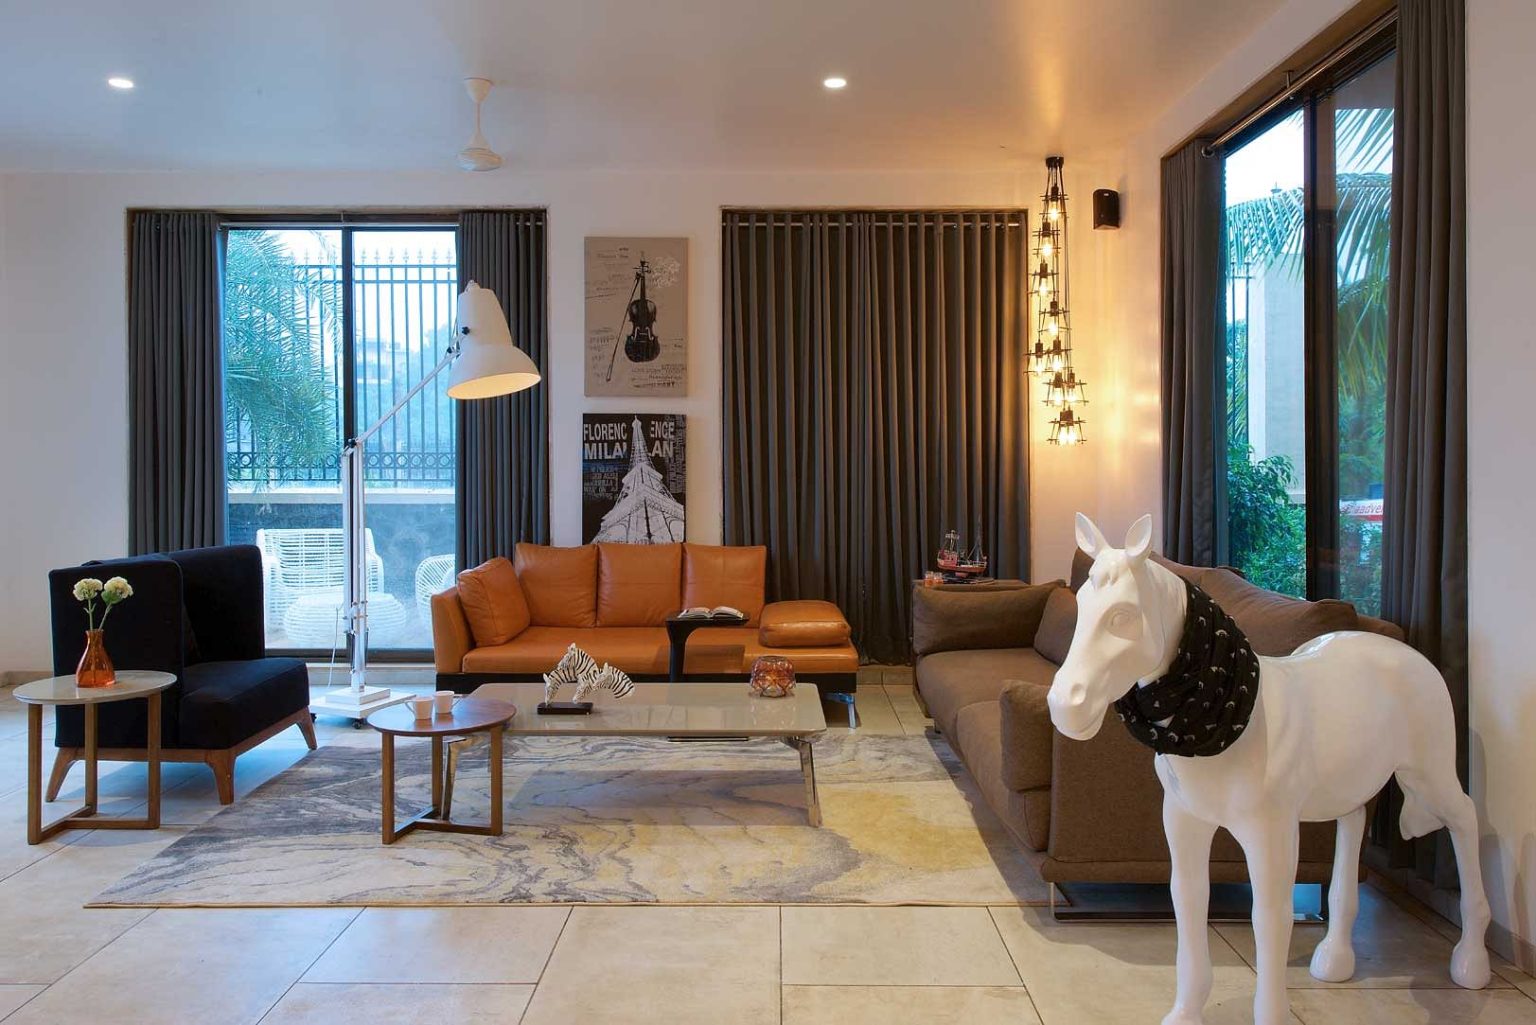 Designed by Mumbai-based architects Gaurav Kharkar & Associates, this family home has a timeless, elegant and artsy look. The living room exudes a warm ambience, and is decorated with sculptures and statement lighting.